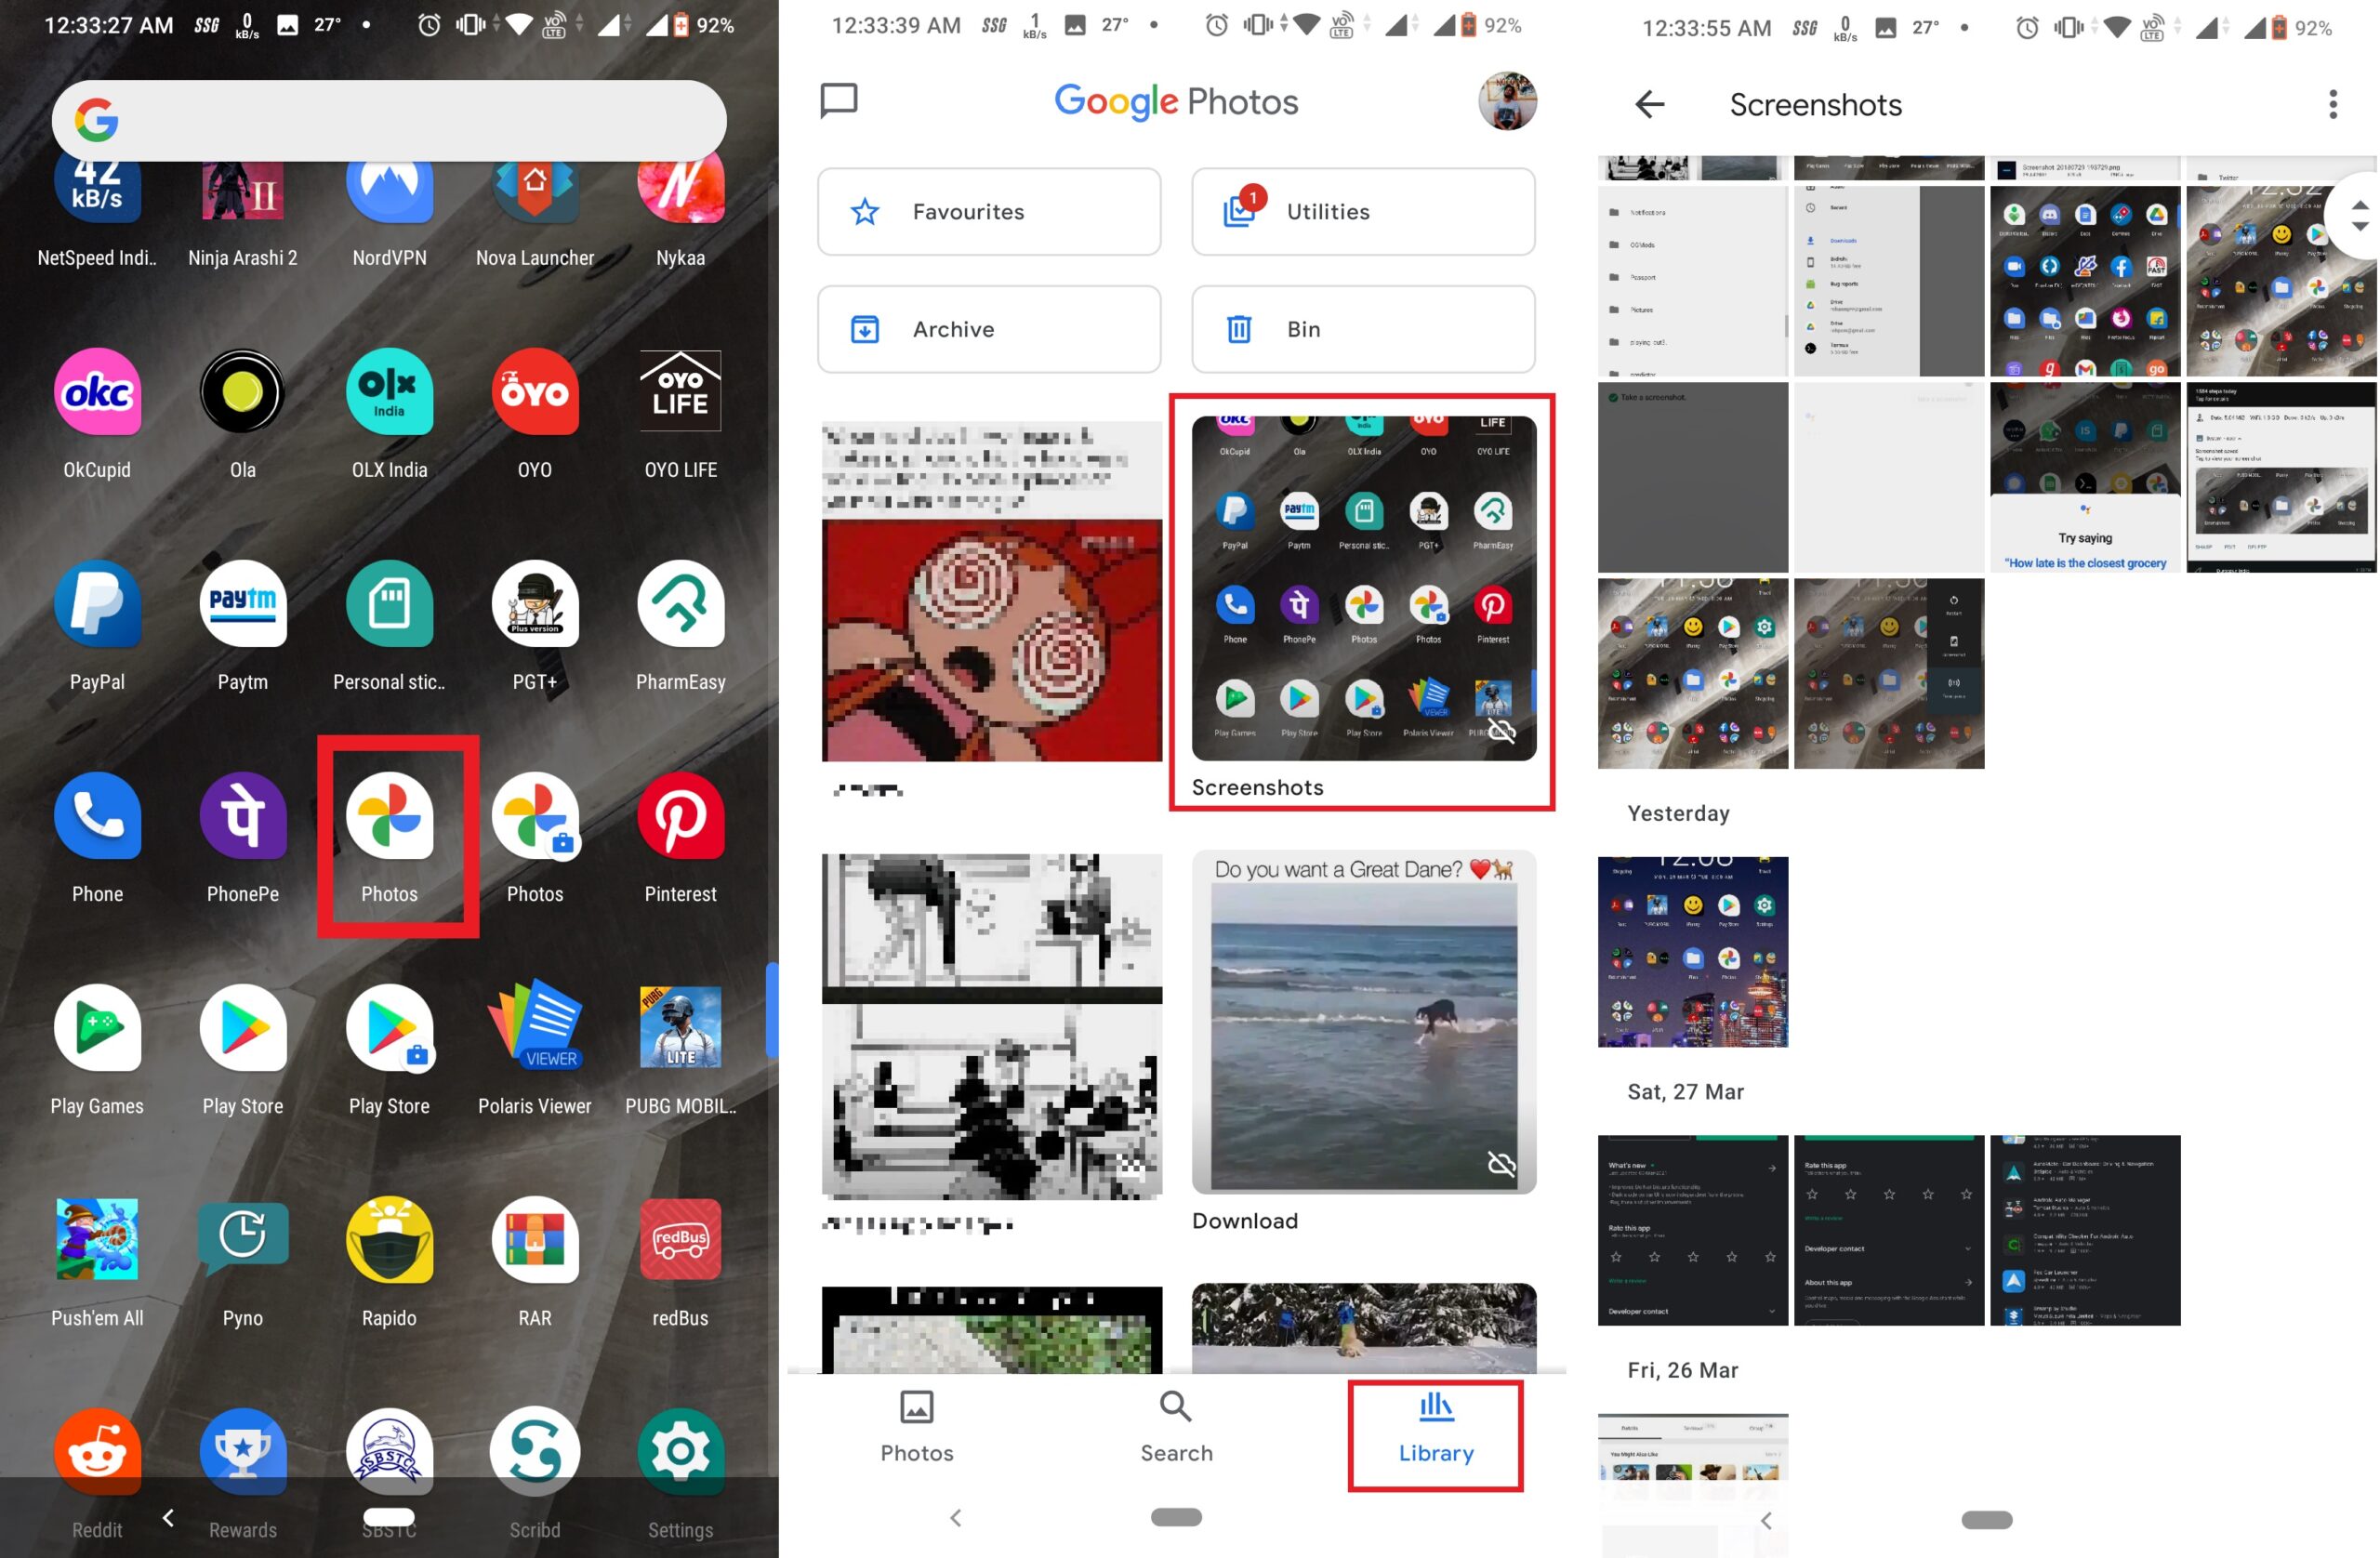 How to take Screenshots on Android Phones